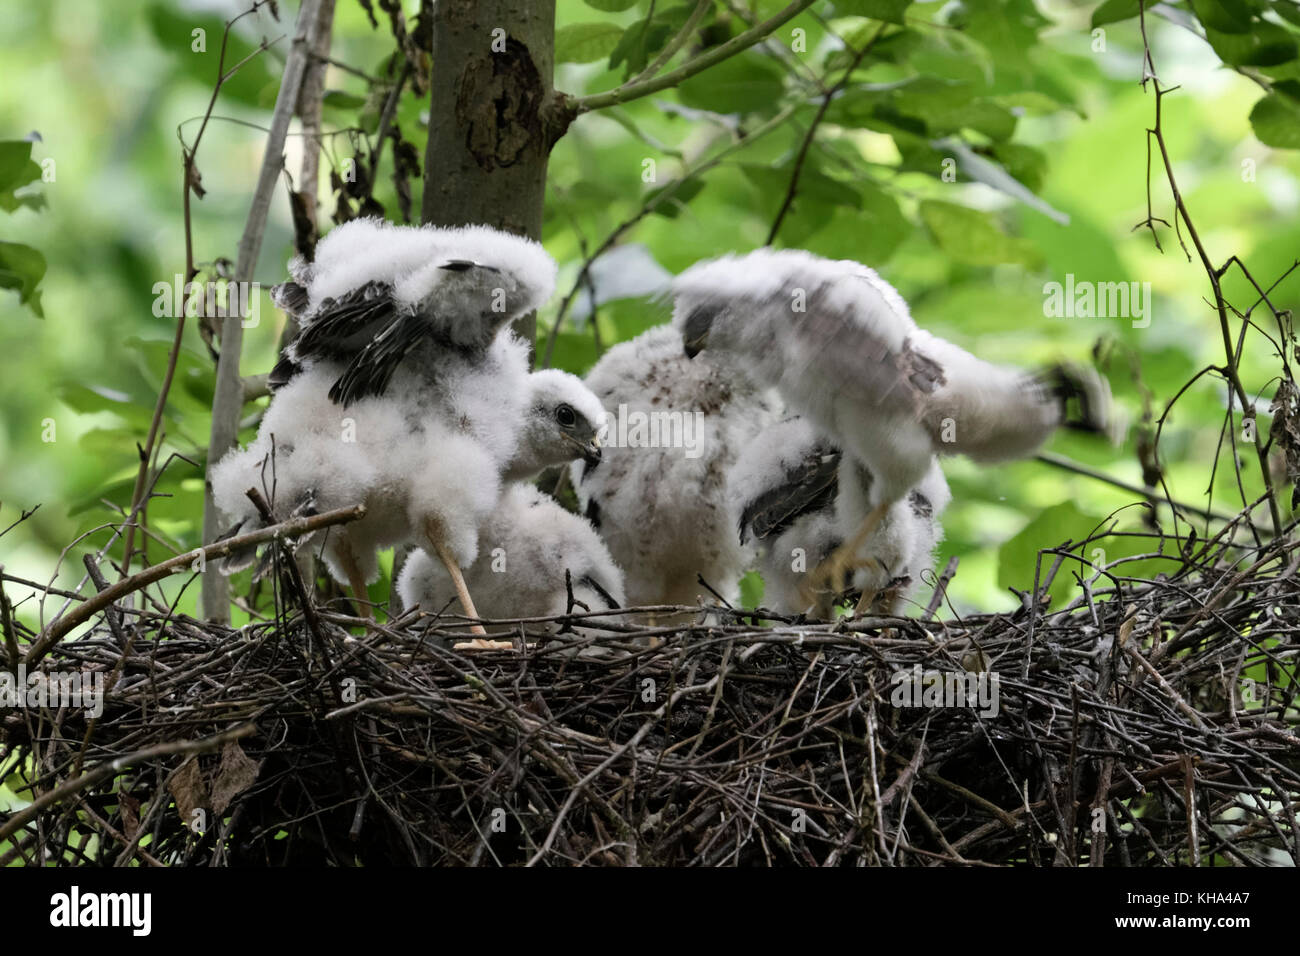 Sparrowhawk / Sperber ( Accipiter nisus ), moulting grown up chicks in nest, training their skills and strength, fluttering wings, wildlife, Europe. Stock Photo